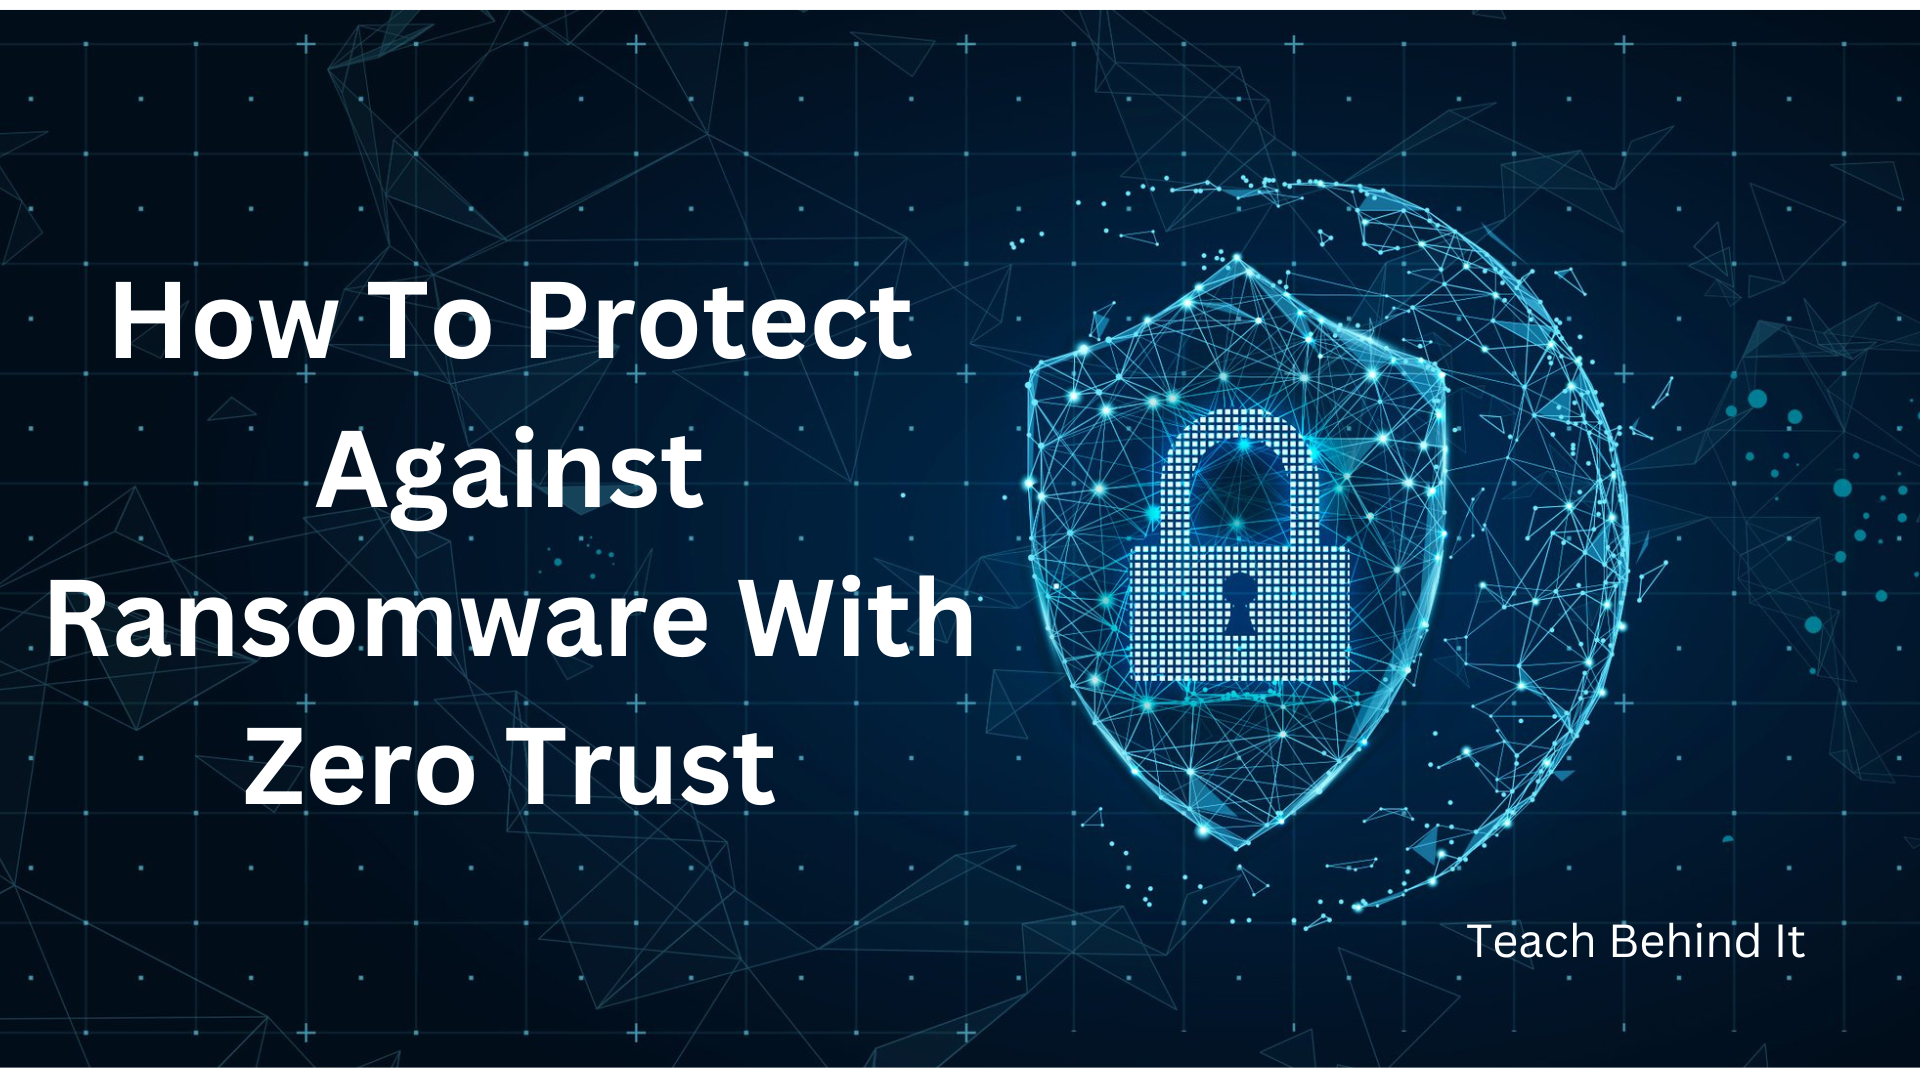 How To Protect Against Ransomware With Zero Trust?